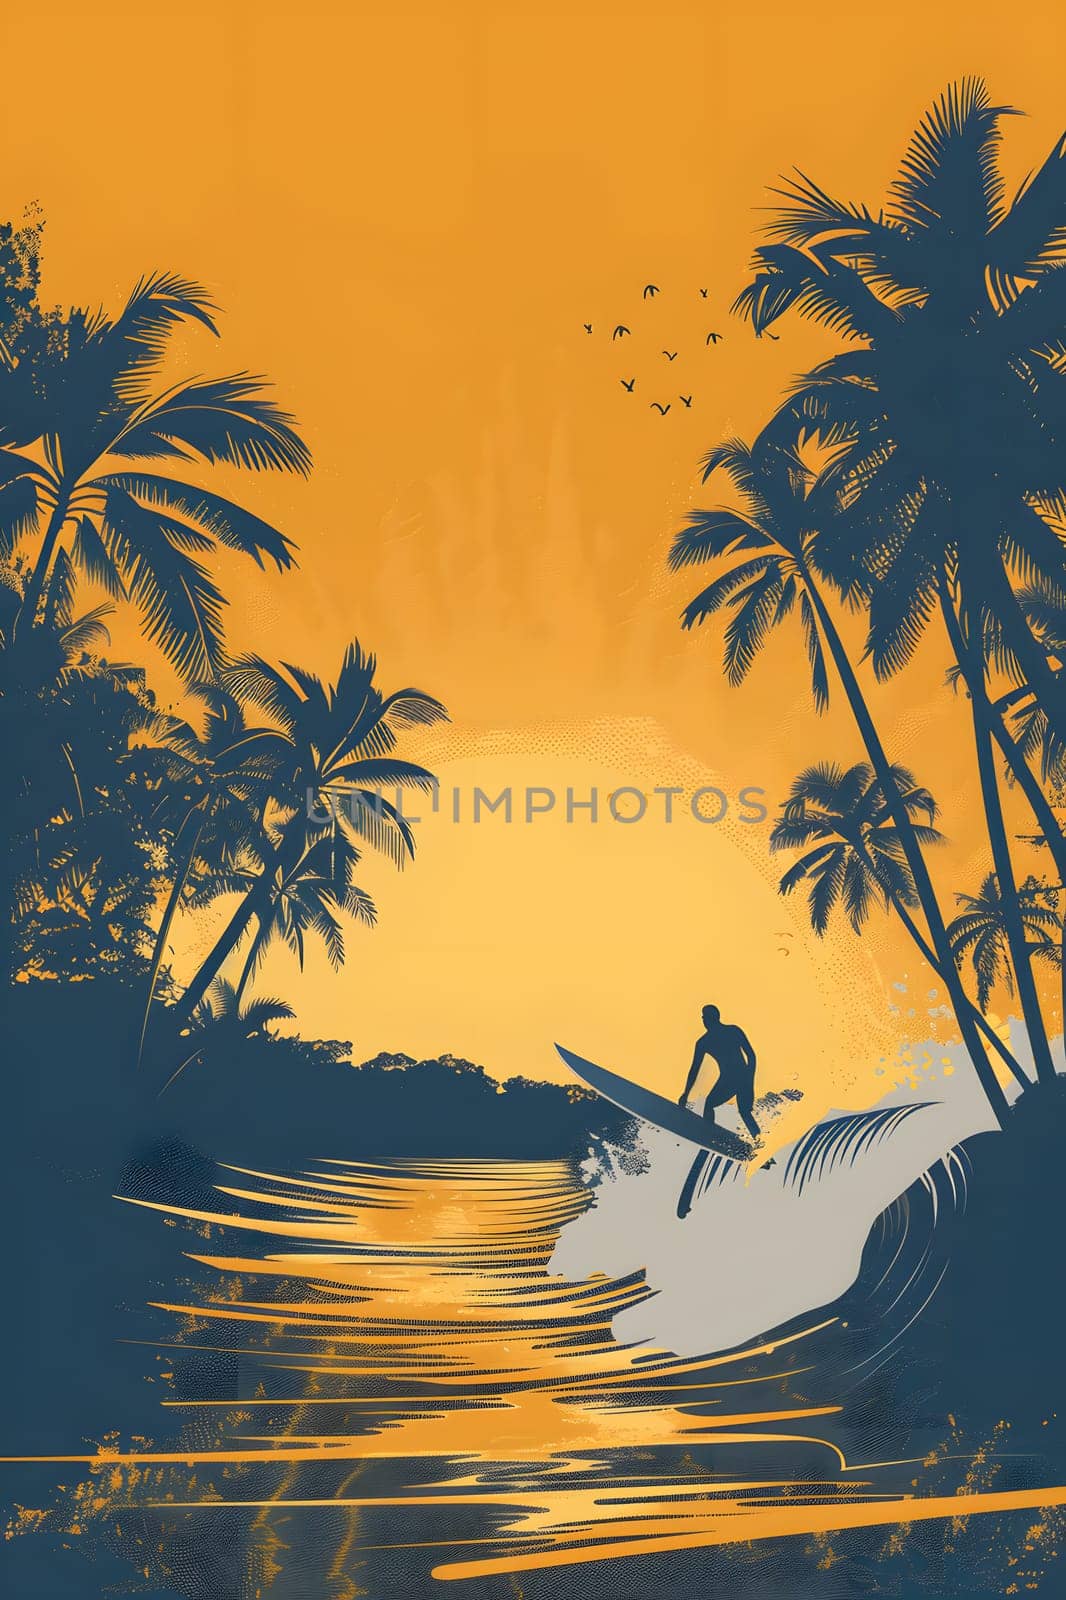 a man is riding a wave on a surfboard in the ocean at sunset by Nadtochiy